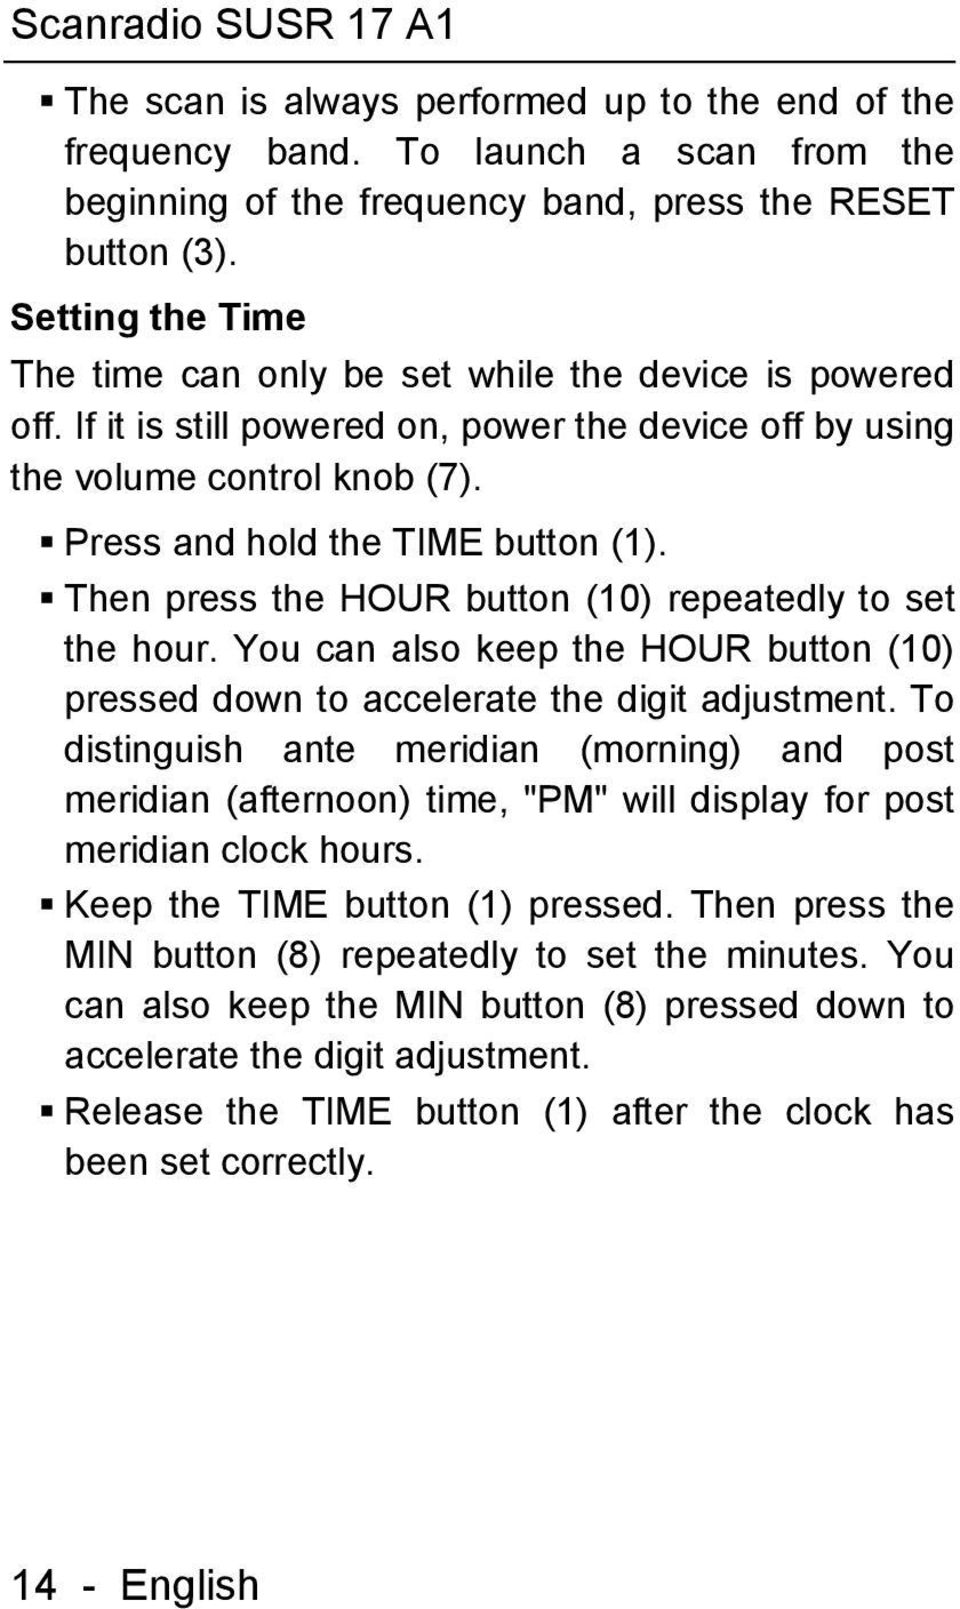 Then press the HOUR button (10) repeatedly to set the hour. You can also keep the HOUR button (10) pressed down to accelerate the digit adjustment.